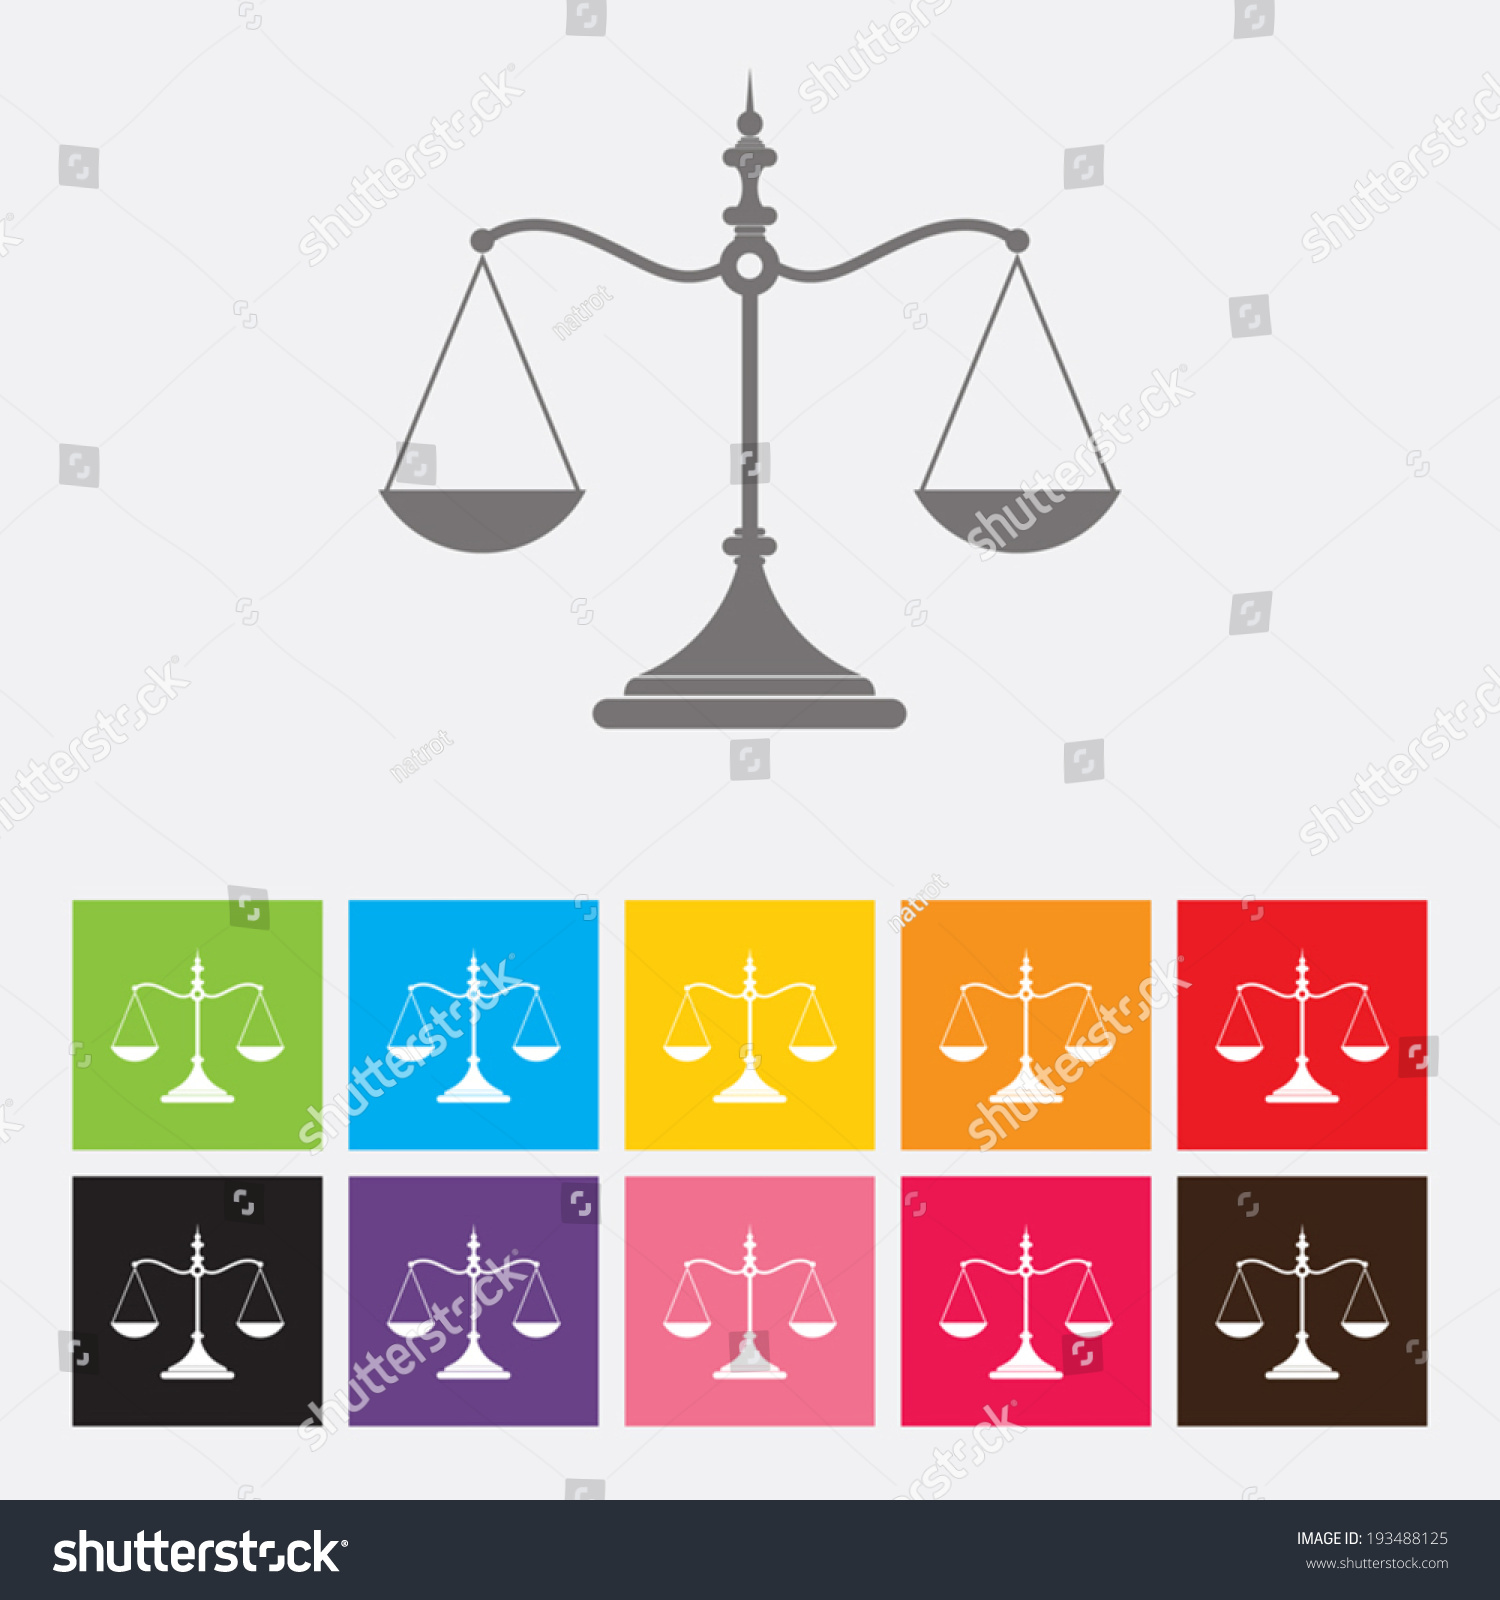 Scales Of Justice Icon - Vector - 193488125 : Shutterstock